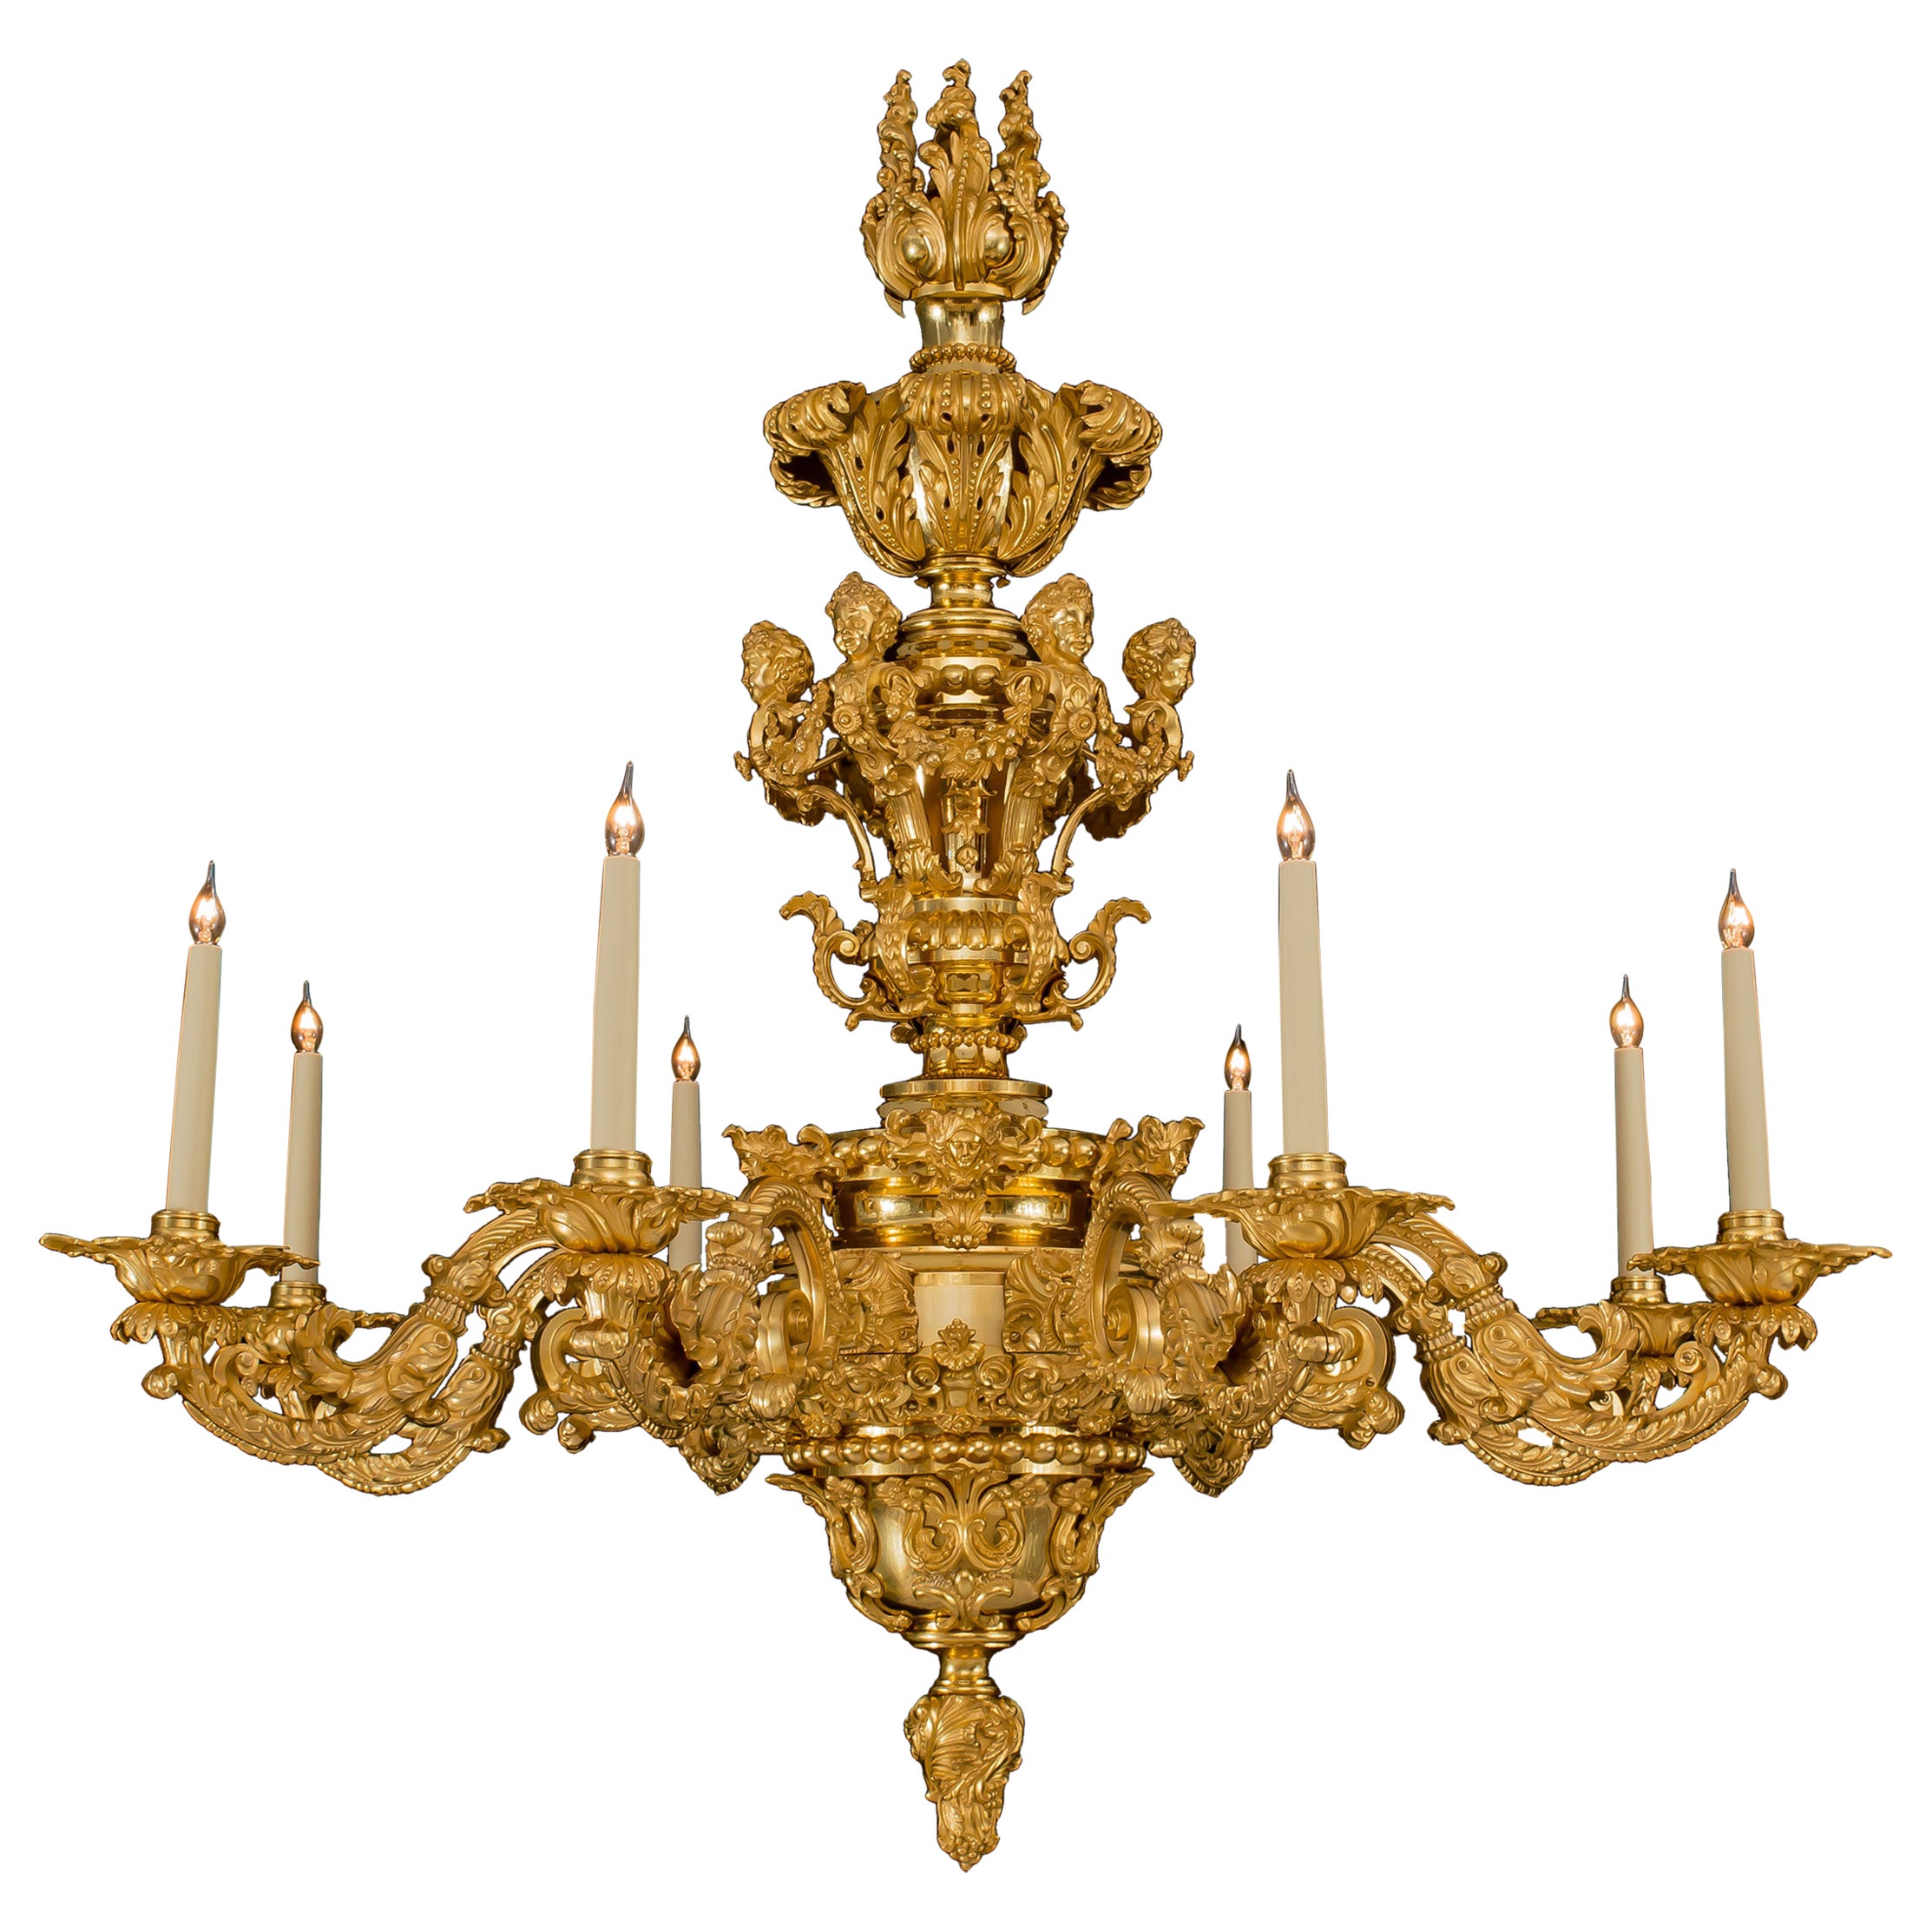 Magnificent George IV Period Ormolu Chandelier by Messenger & Phipson For Sale